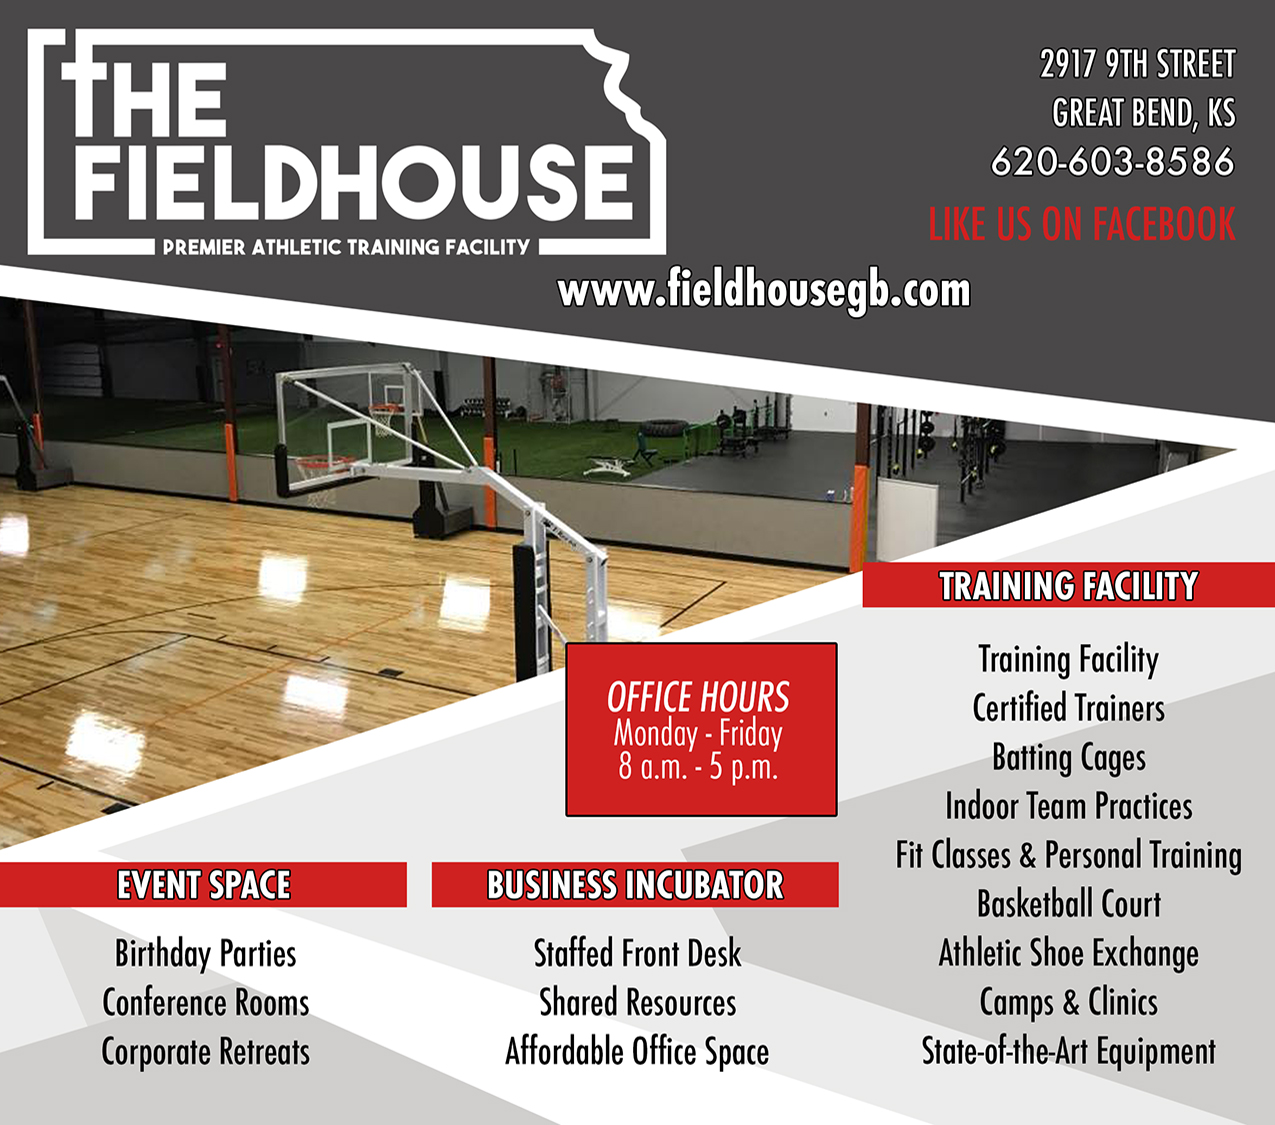 The Fieldhouse